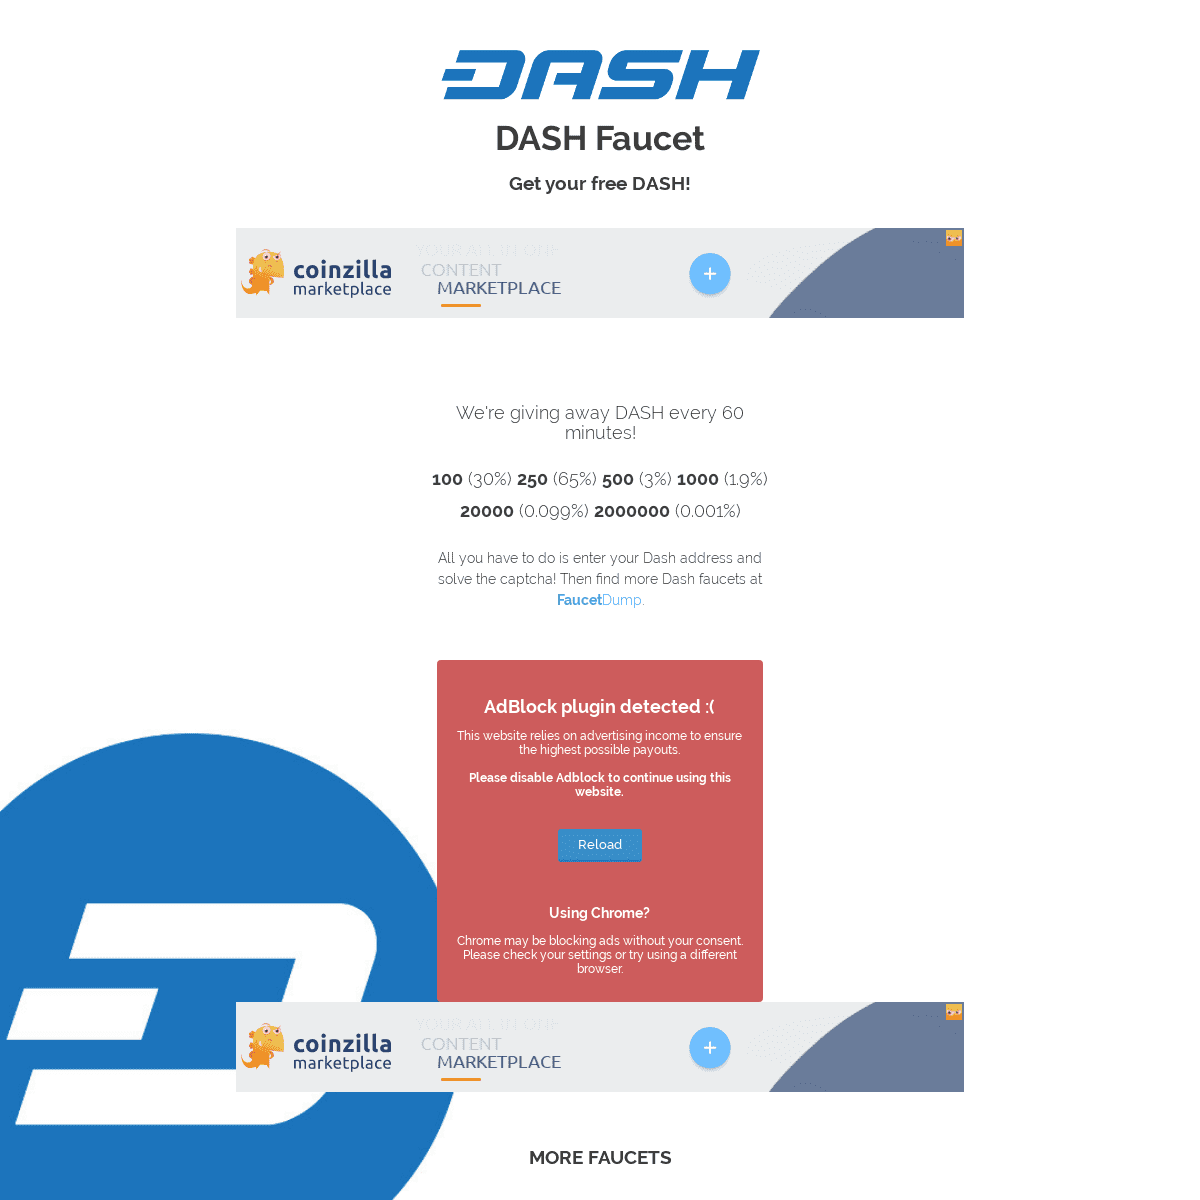 A complete backup of dashfaucet.net